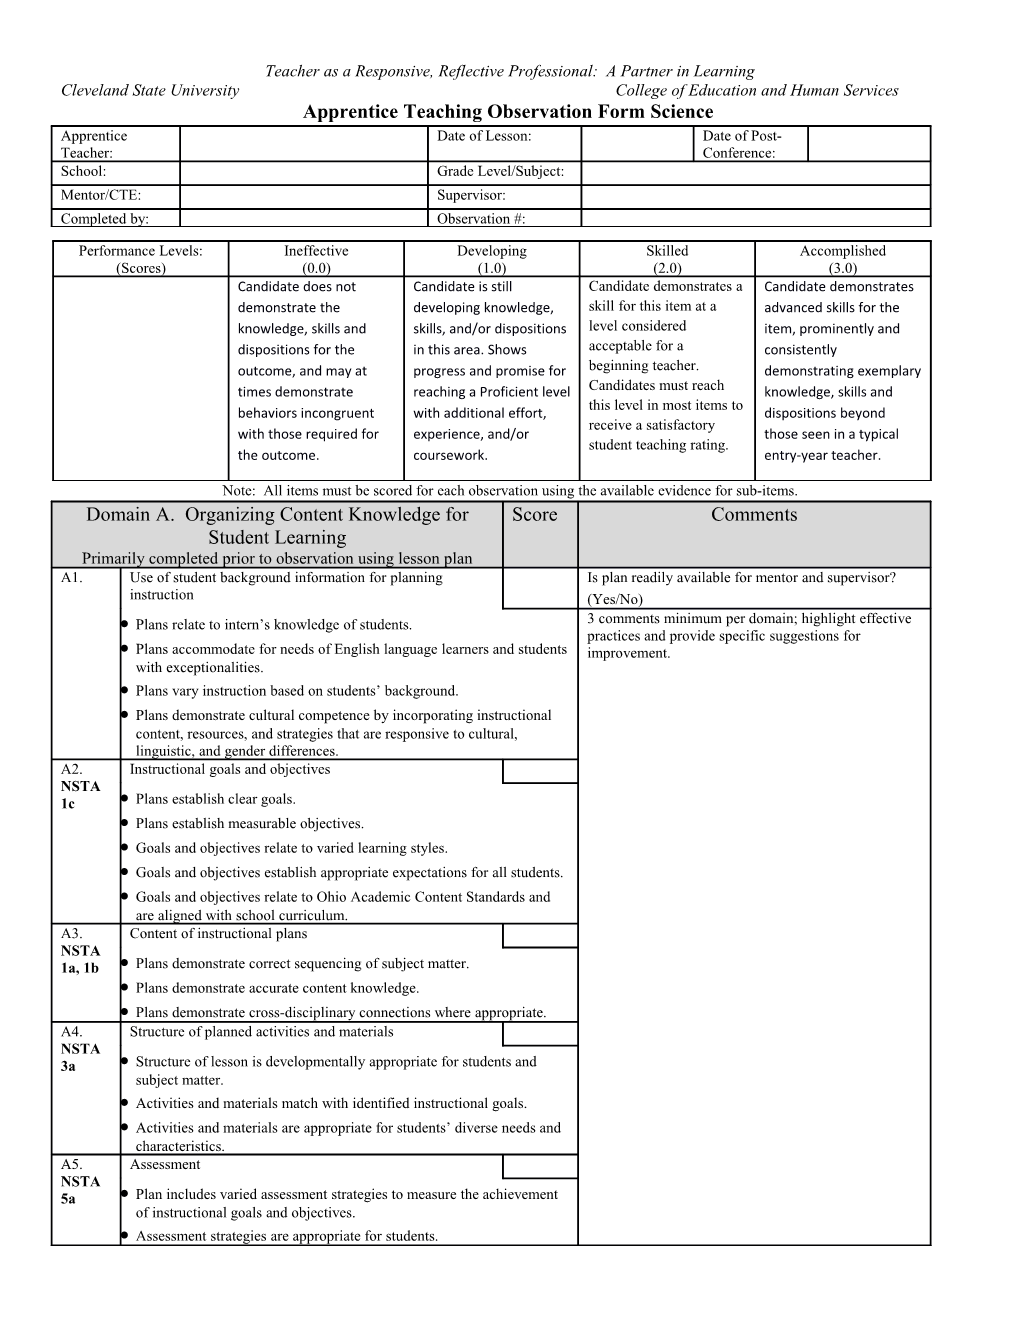 Apprentice Teaching Observation Form Science